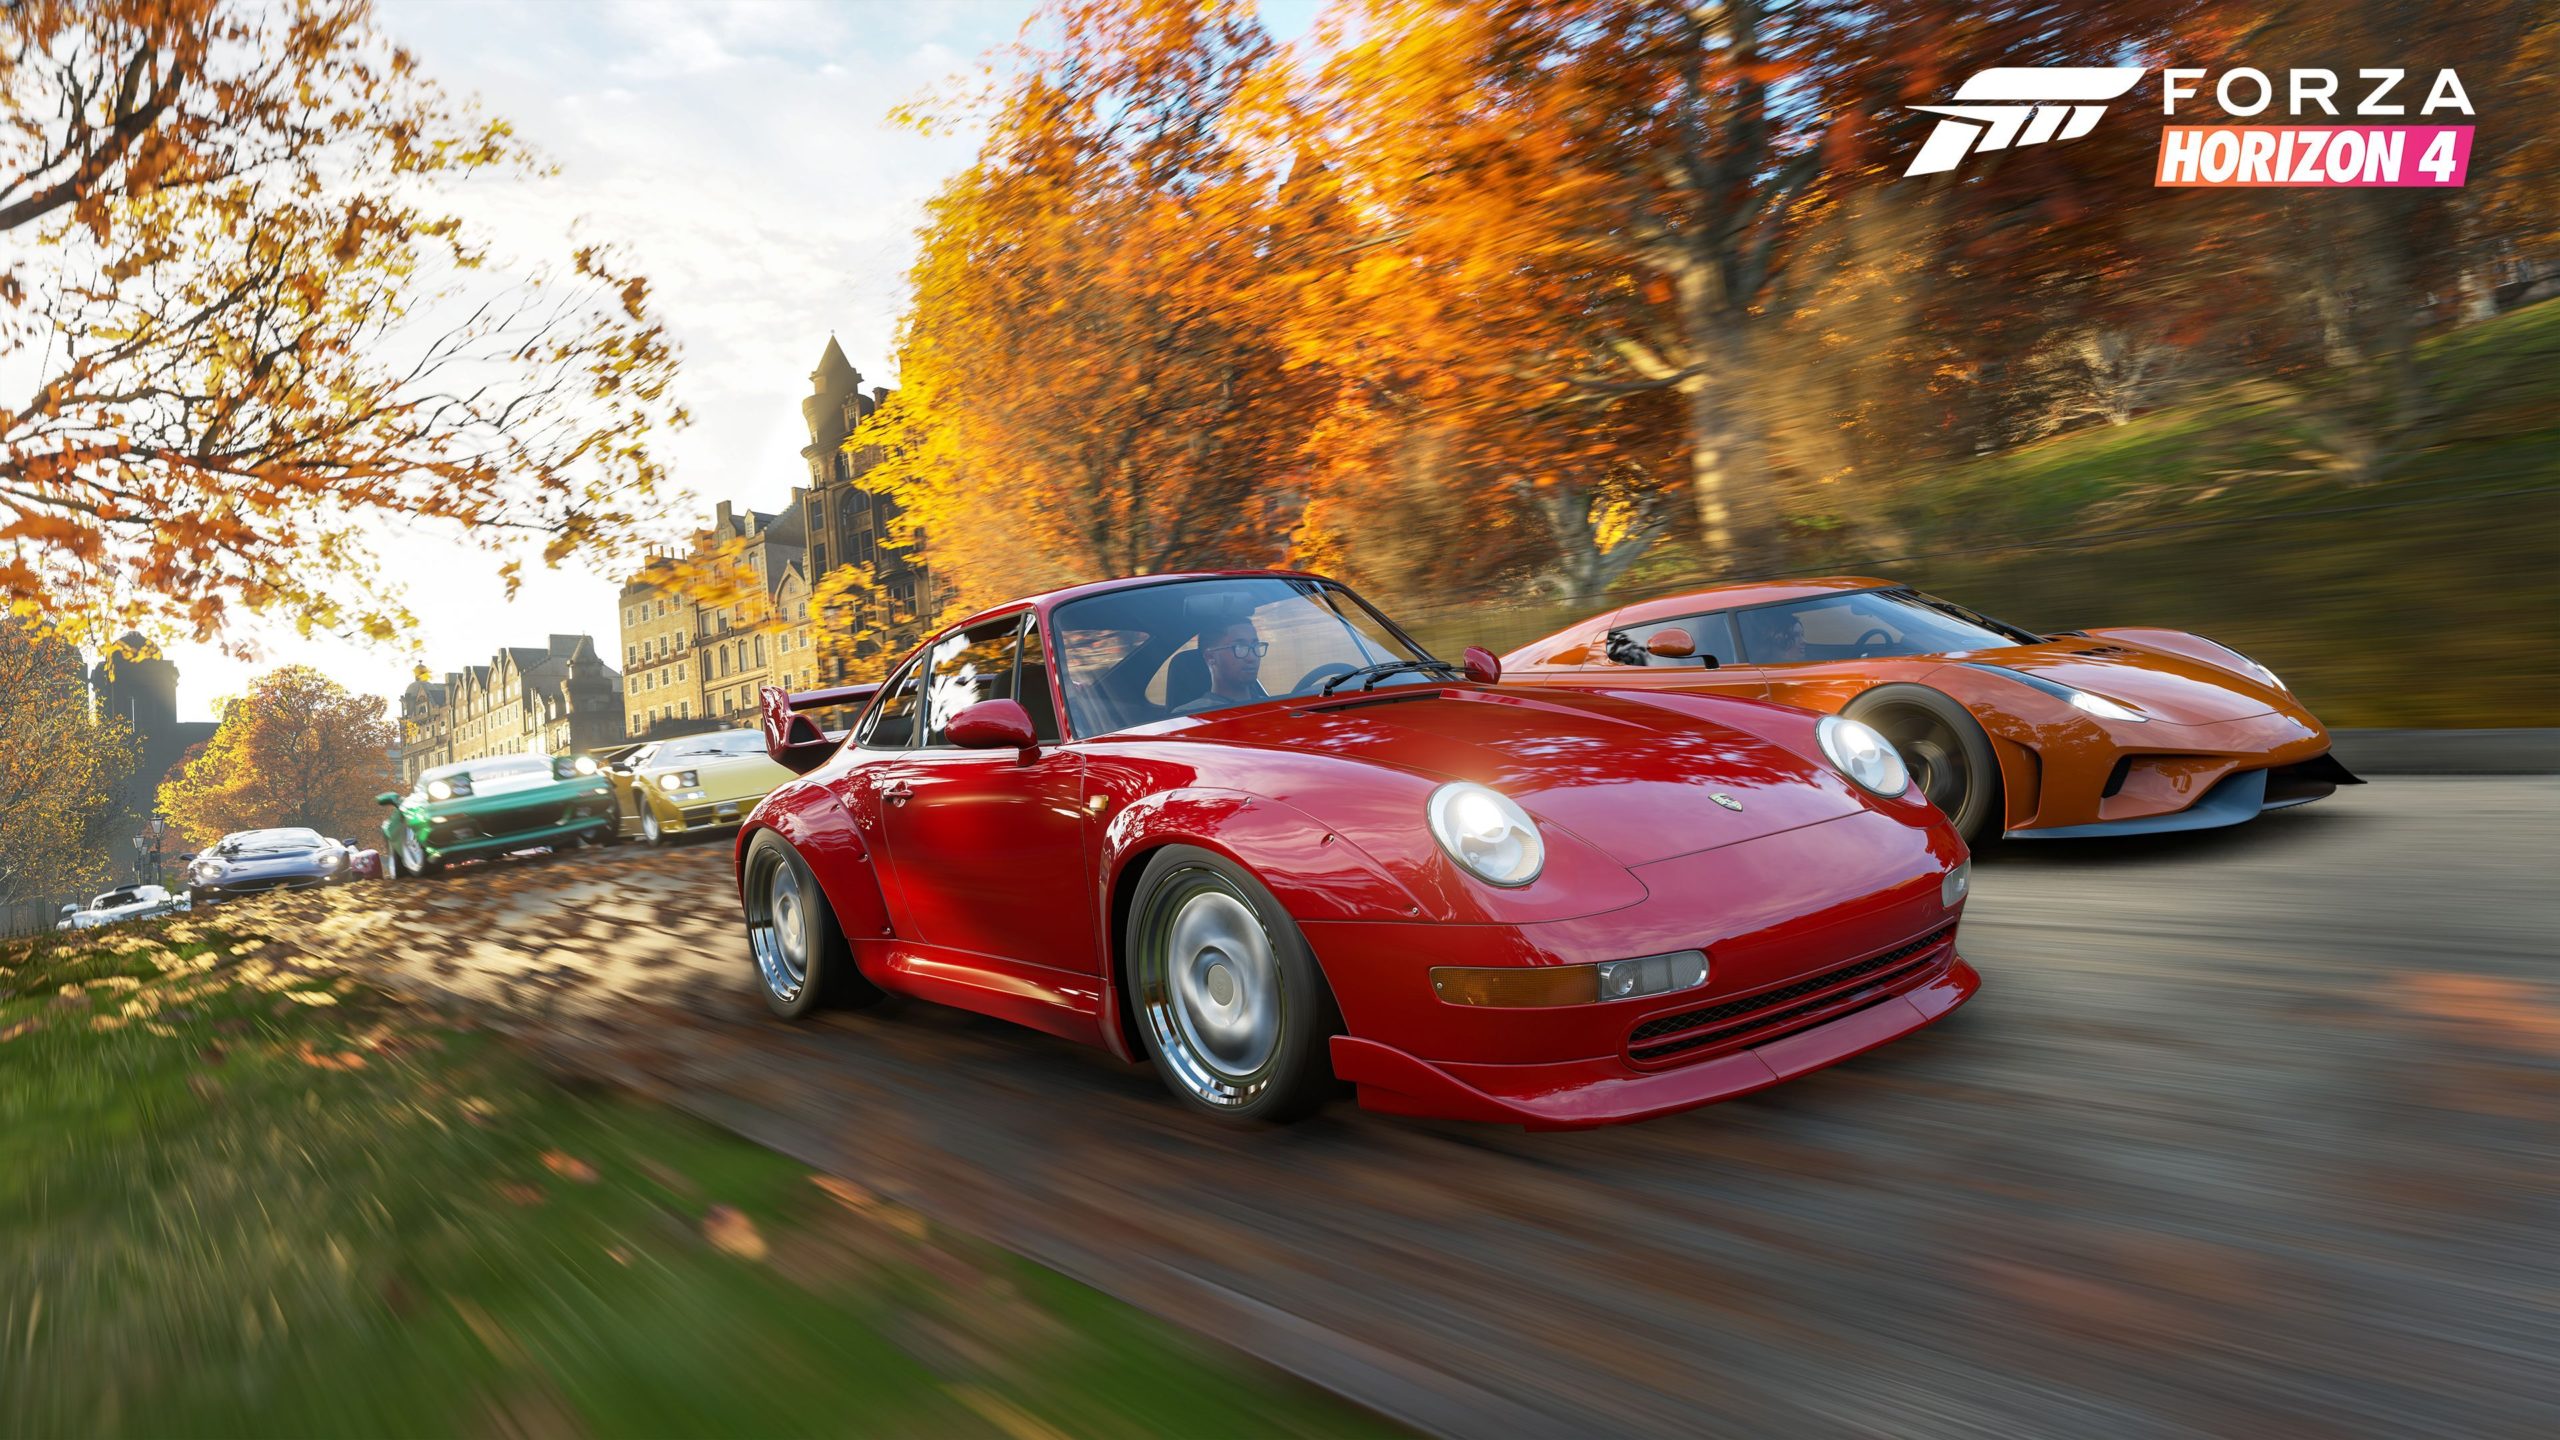 Forza Horizon 4 is coming to Steam on March 9th - The Verge